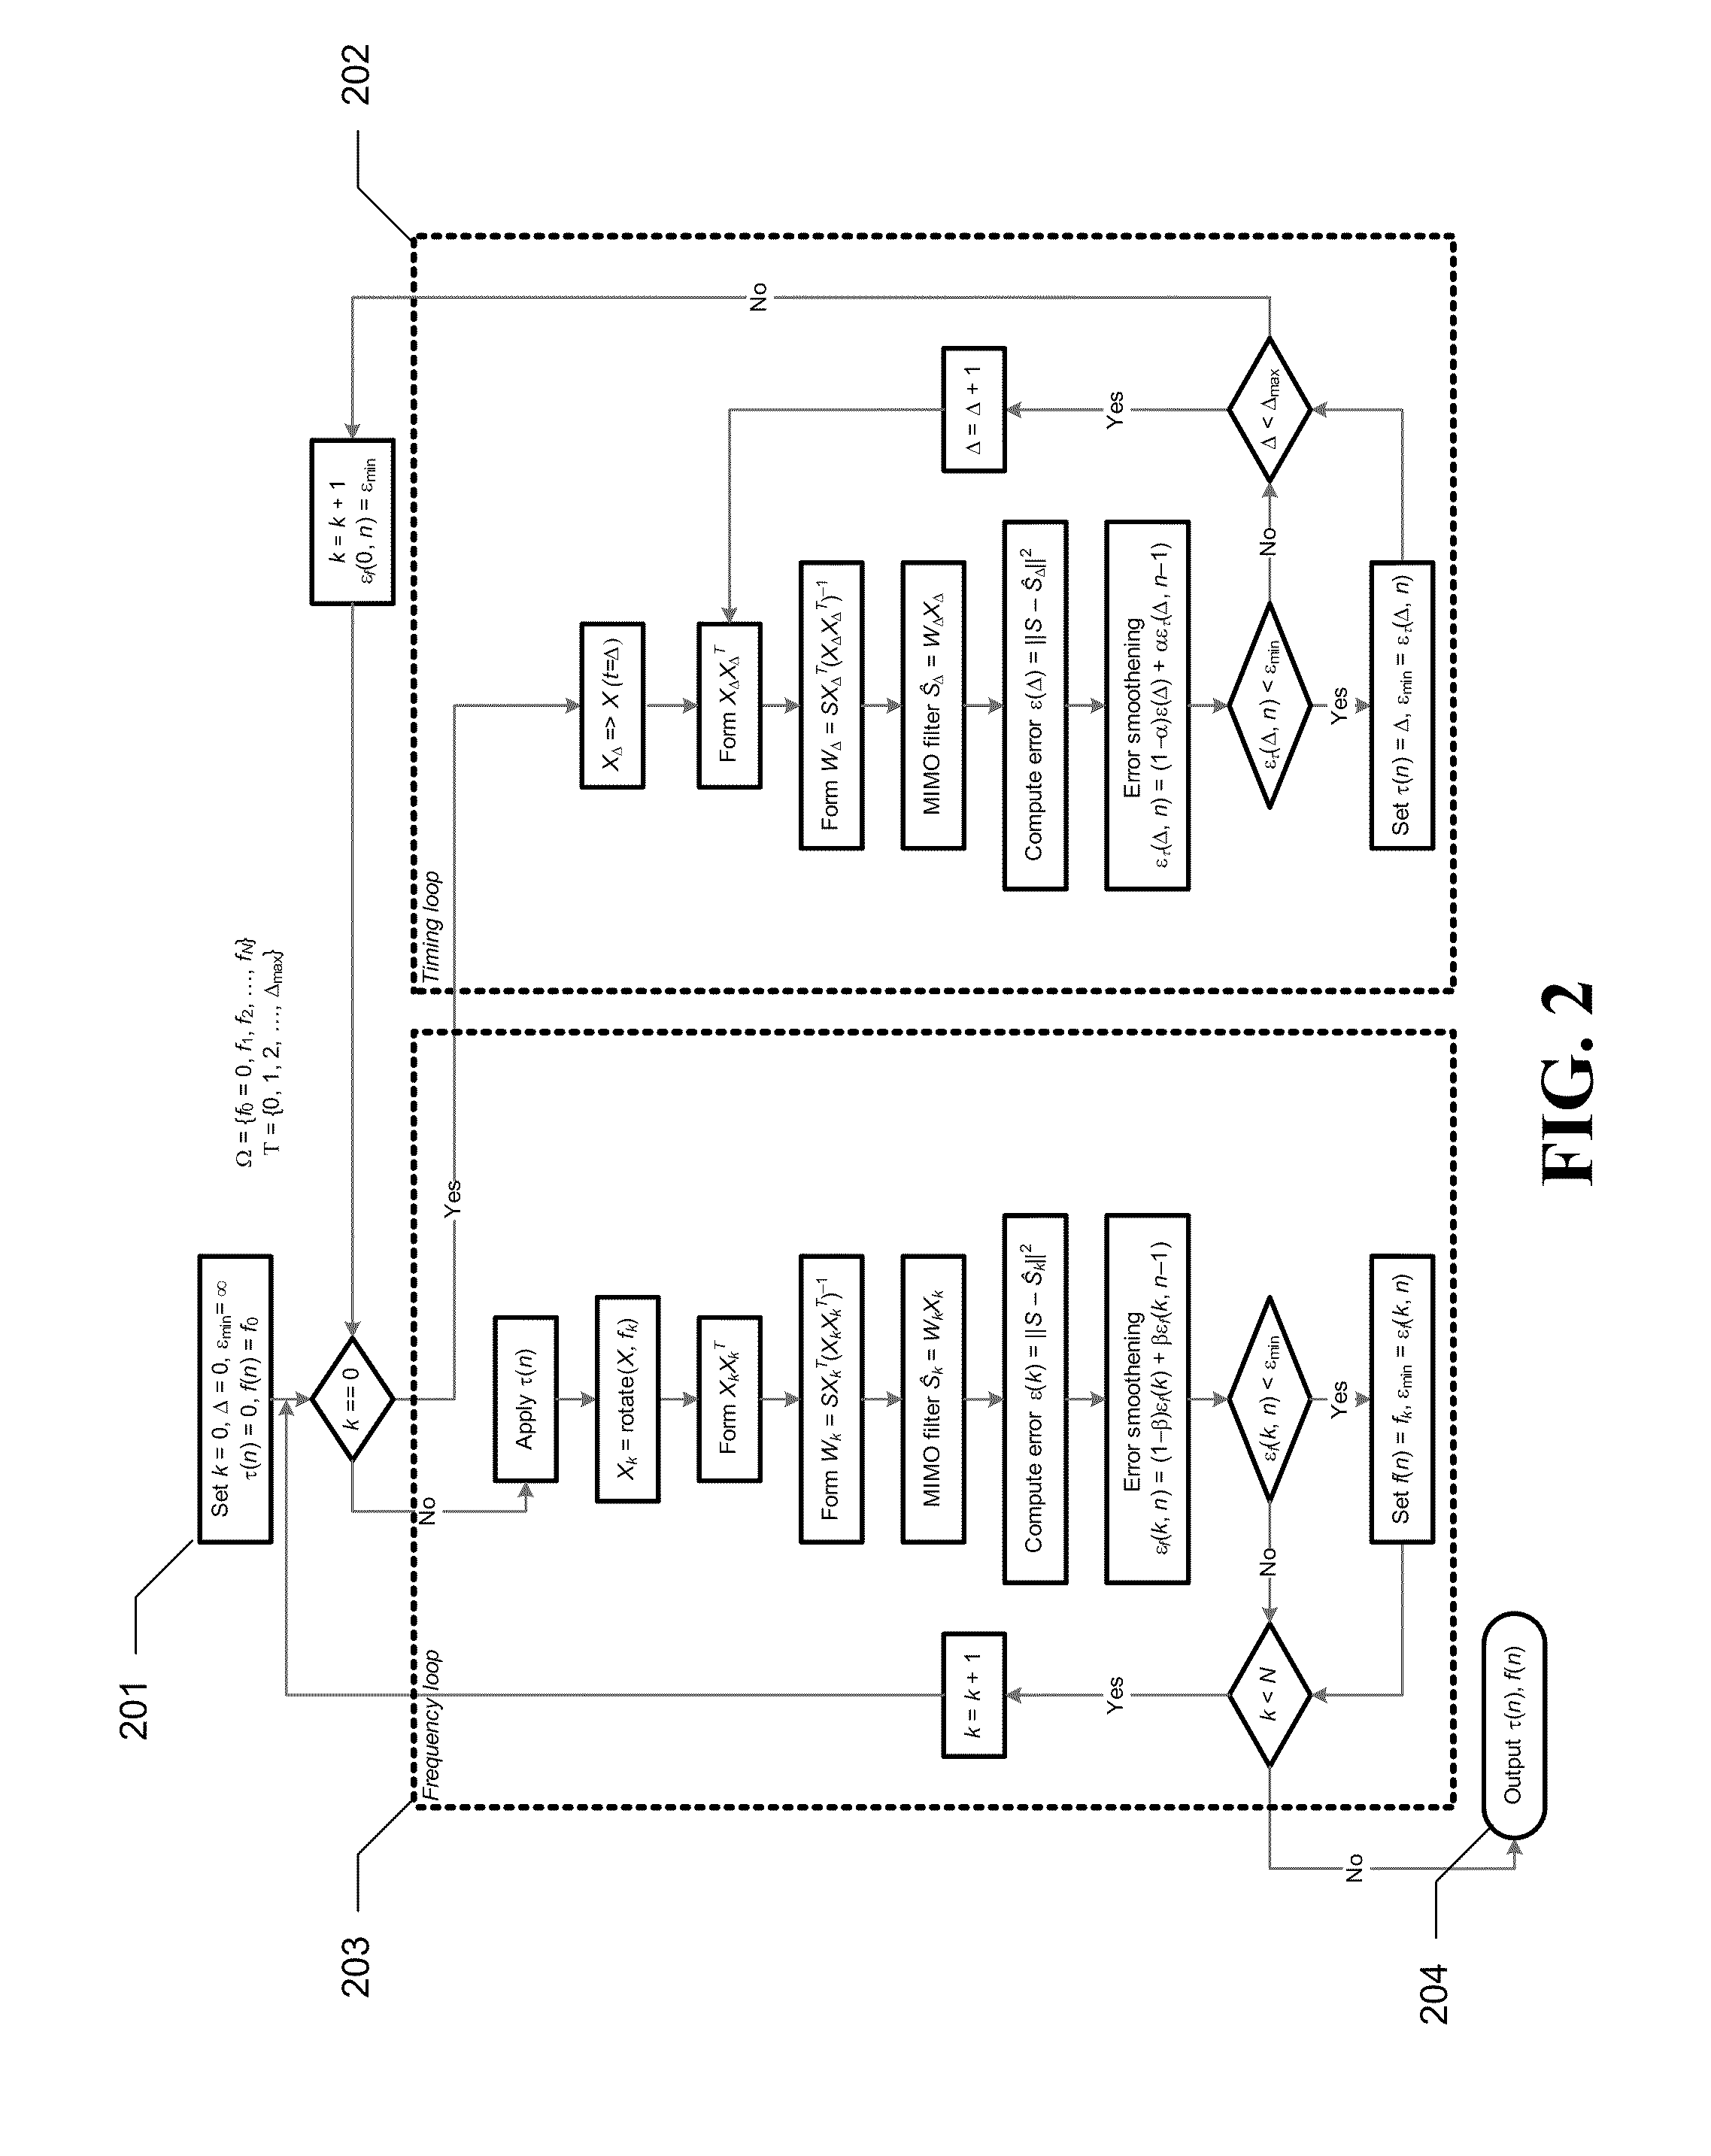 Interference cancellation under non-stationary conditions